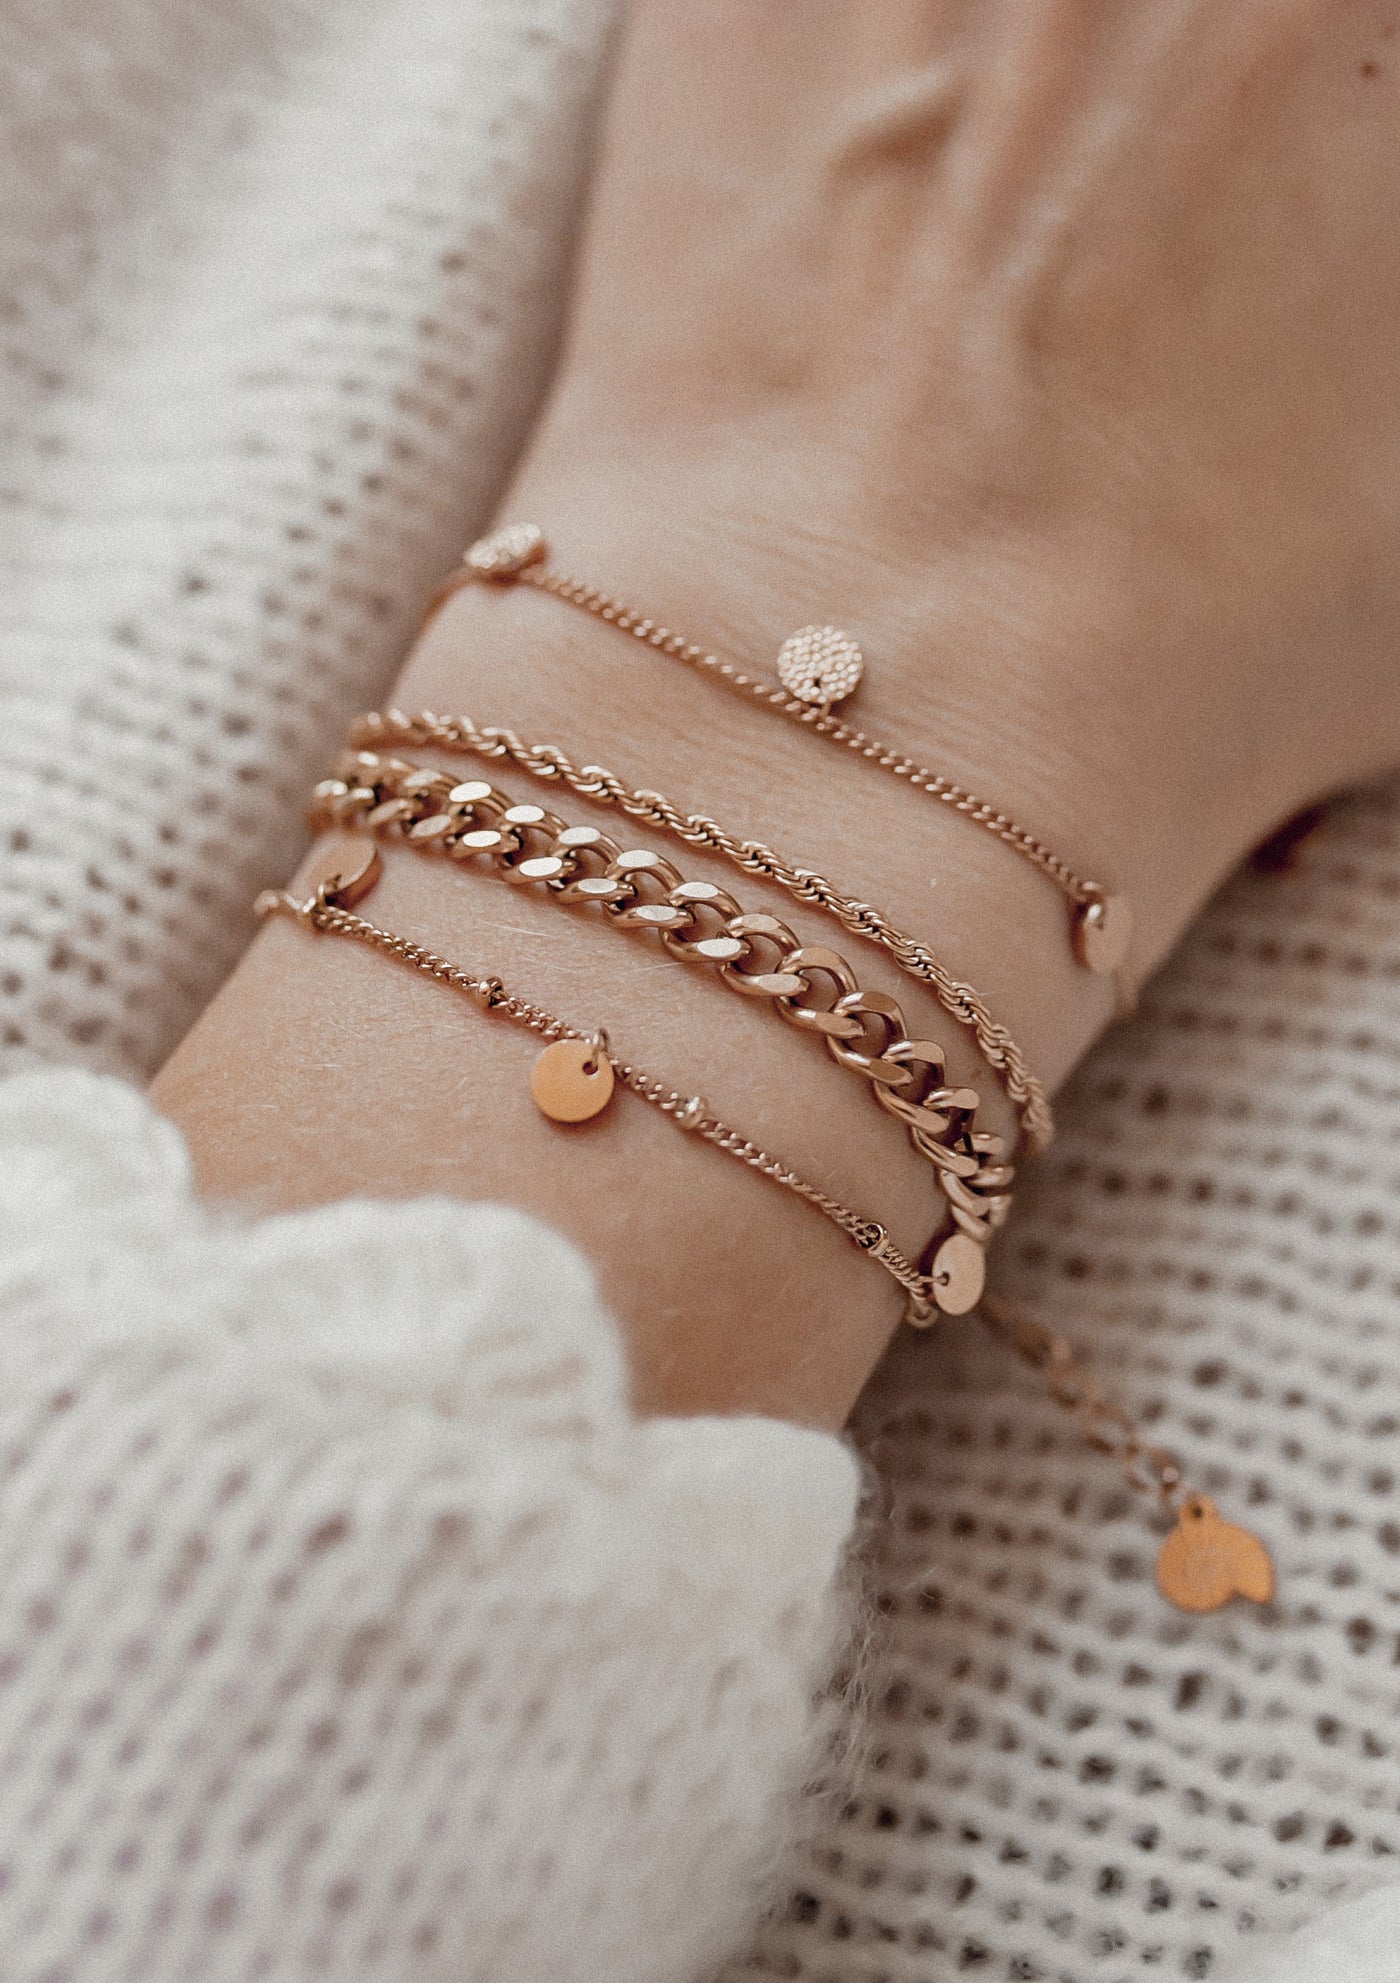 Chunky Curb Chain Bracelet Rose Gold